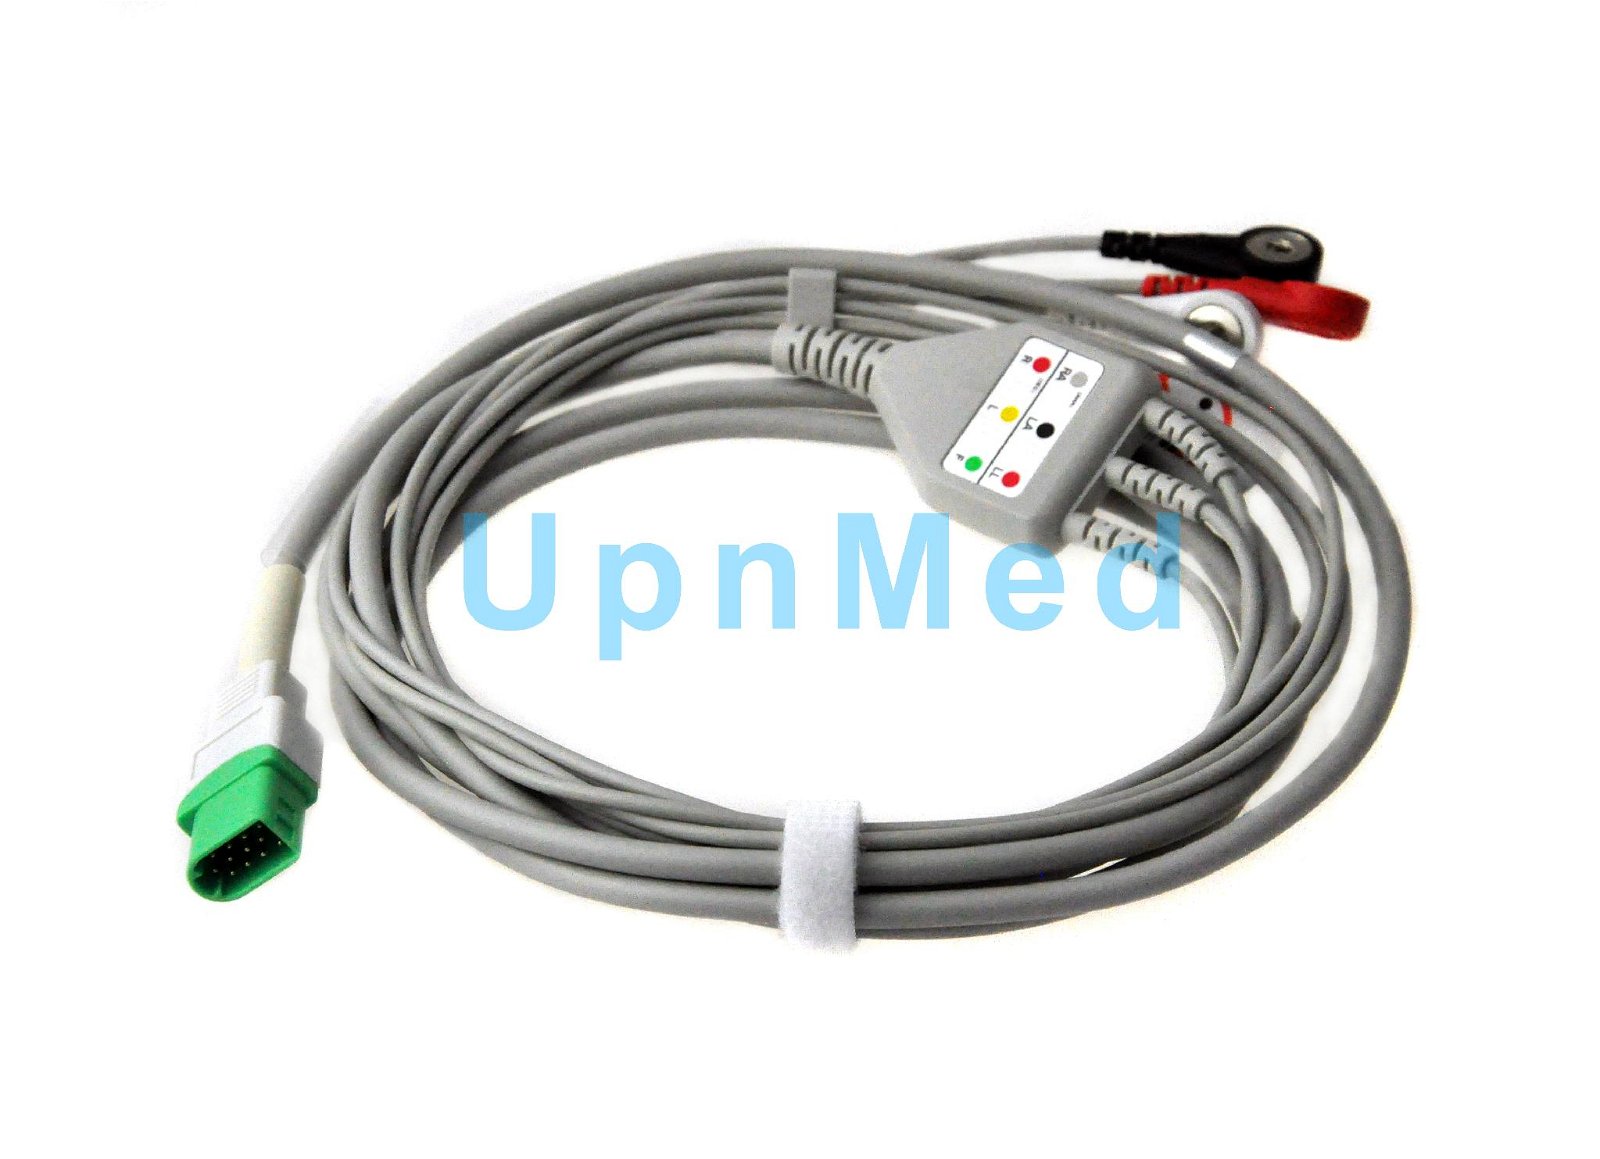 Datascope Passport V12 ECG Cable with leadwires 2